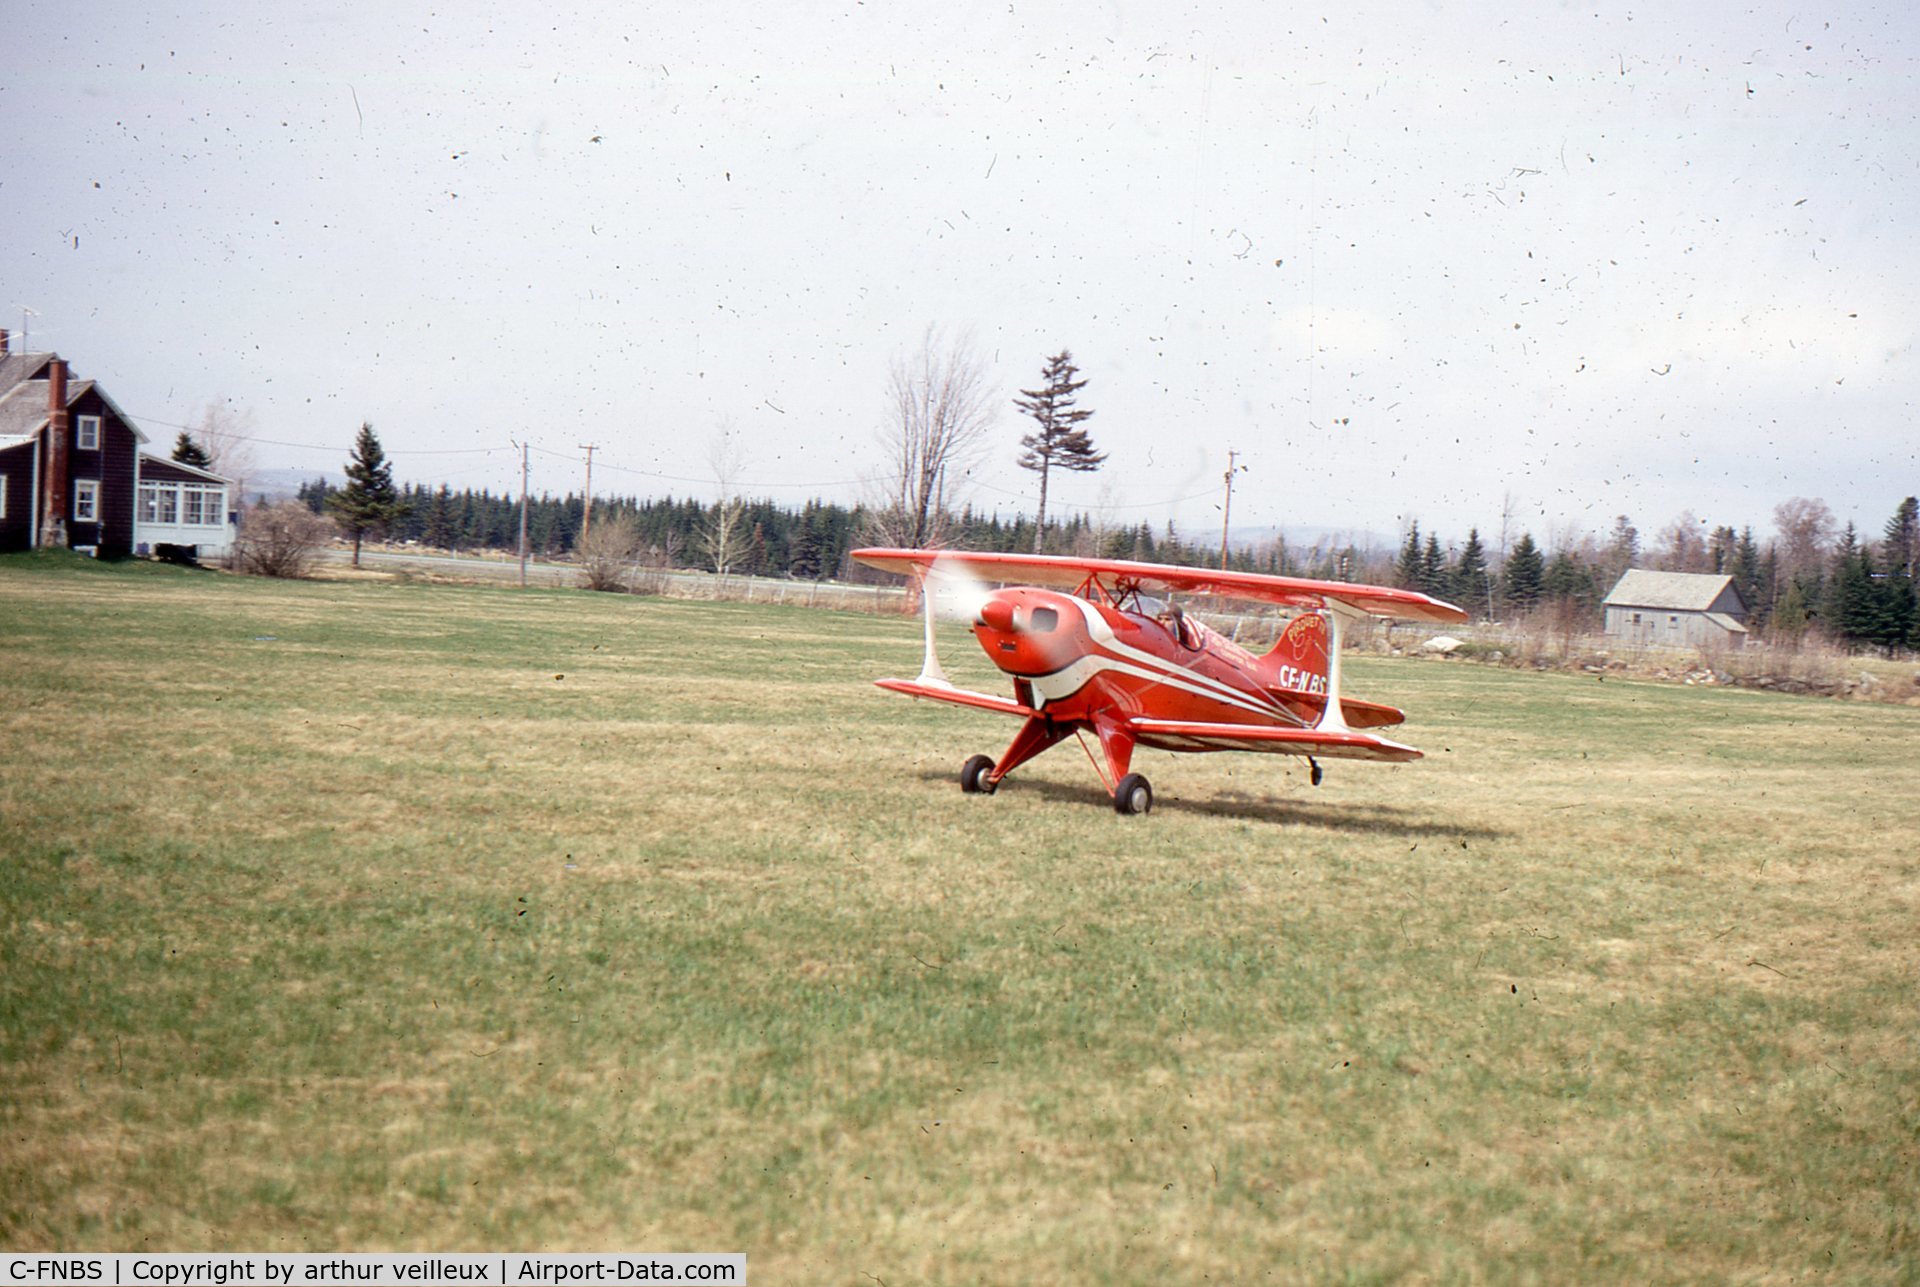 C-FNBS, 1969 Pitts S-1C Special C/N LV1003, hand built by leo veilleux in compton quebec, canada